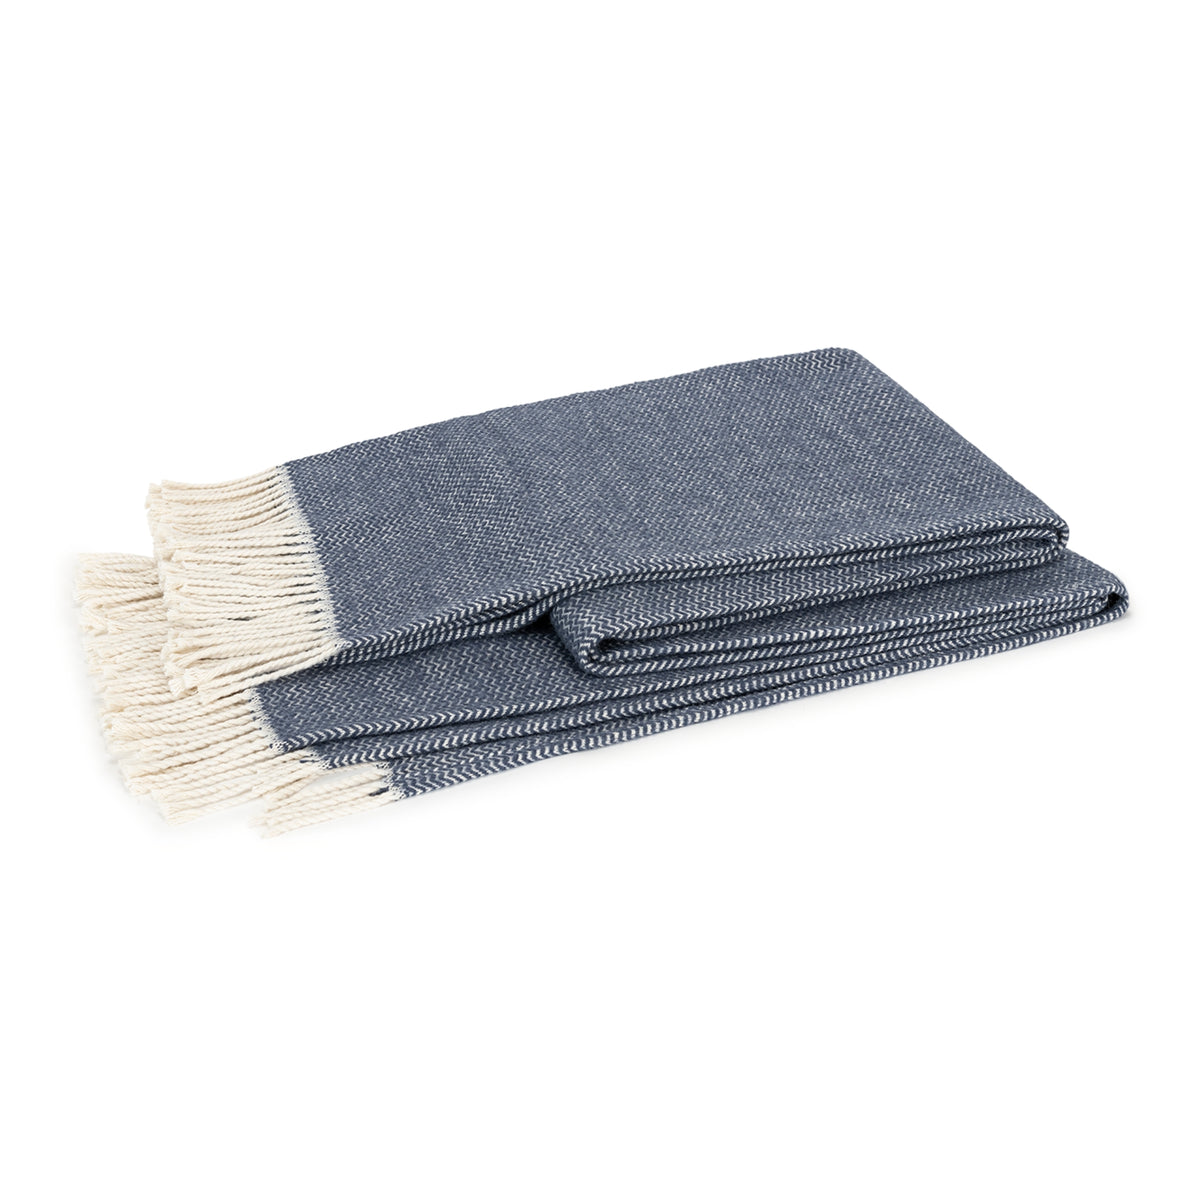 Folded Matouk Rhodes Throws - Prussian Blue colored against white background